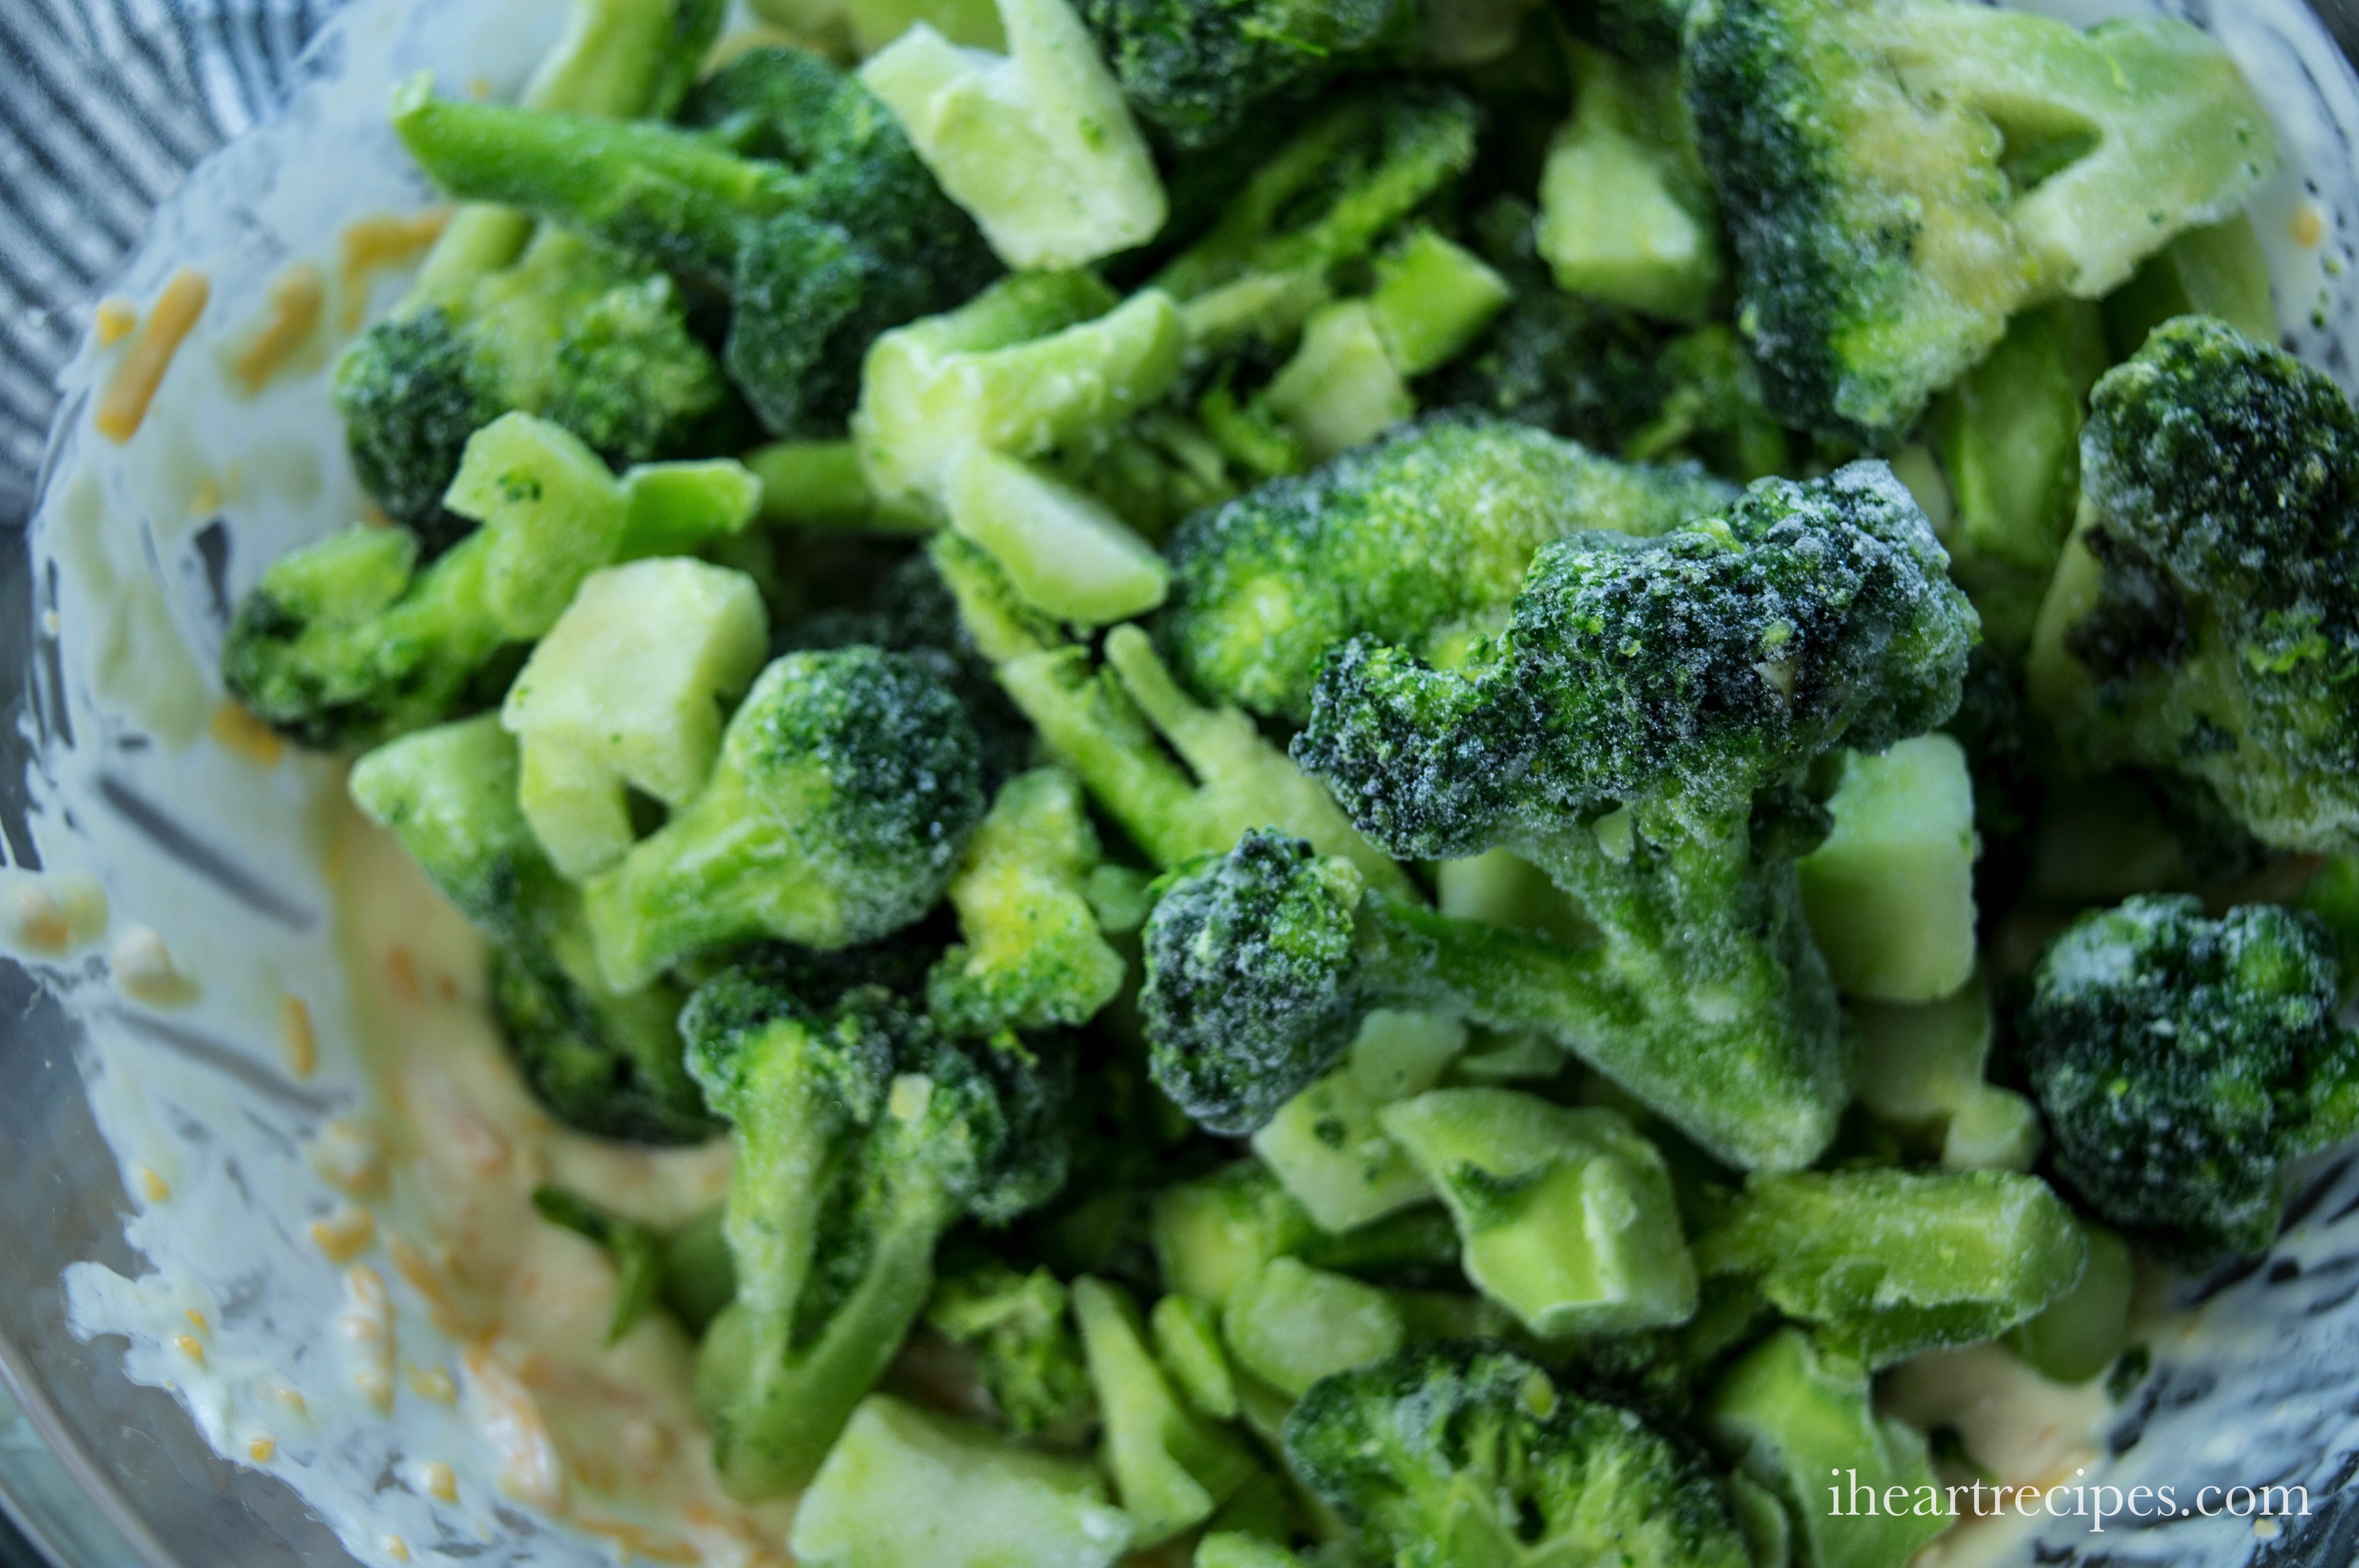 A pile of frozen broccoli florets sits in a bowl on top of a creamy mixture of mayonnaise and shredded cheese. This broccoli mixture is the body of a Southern-style broccoli casserole.